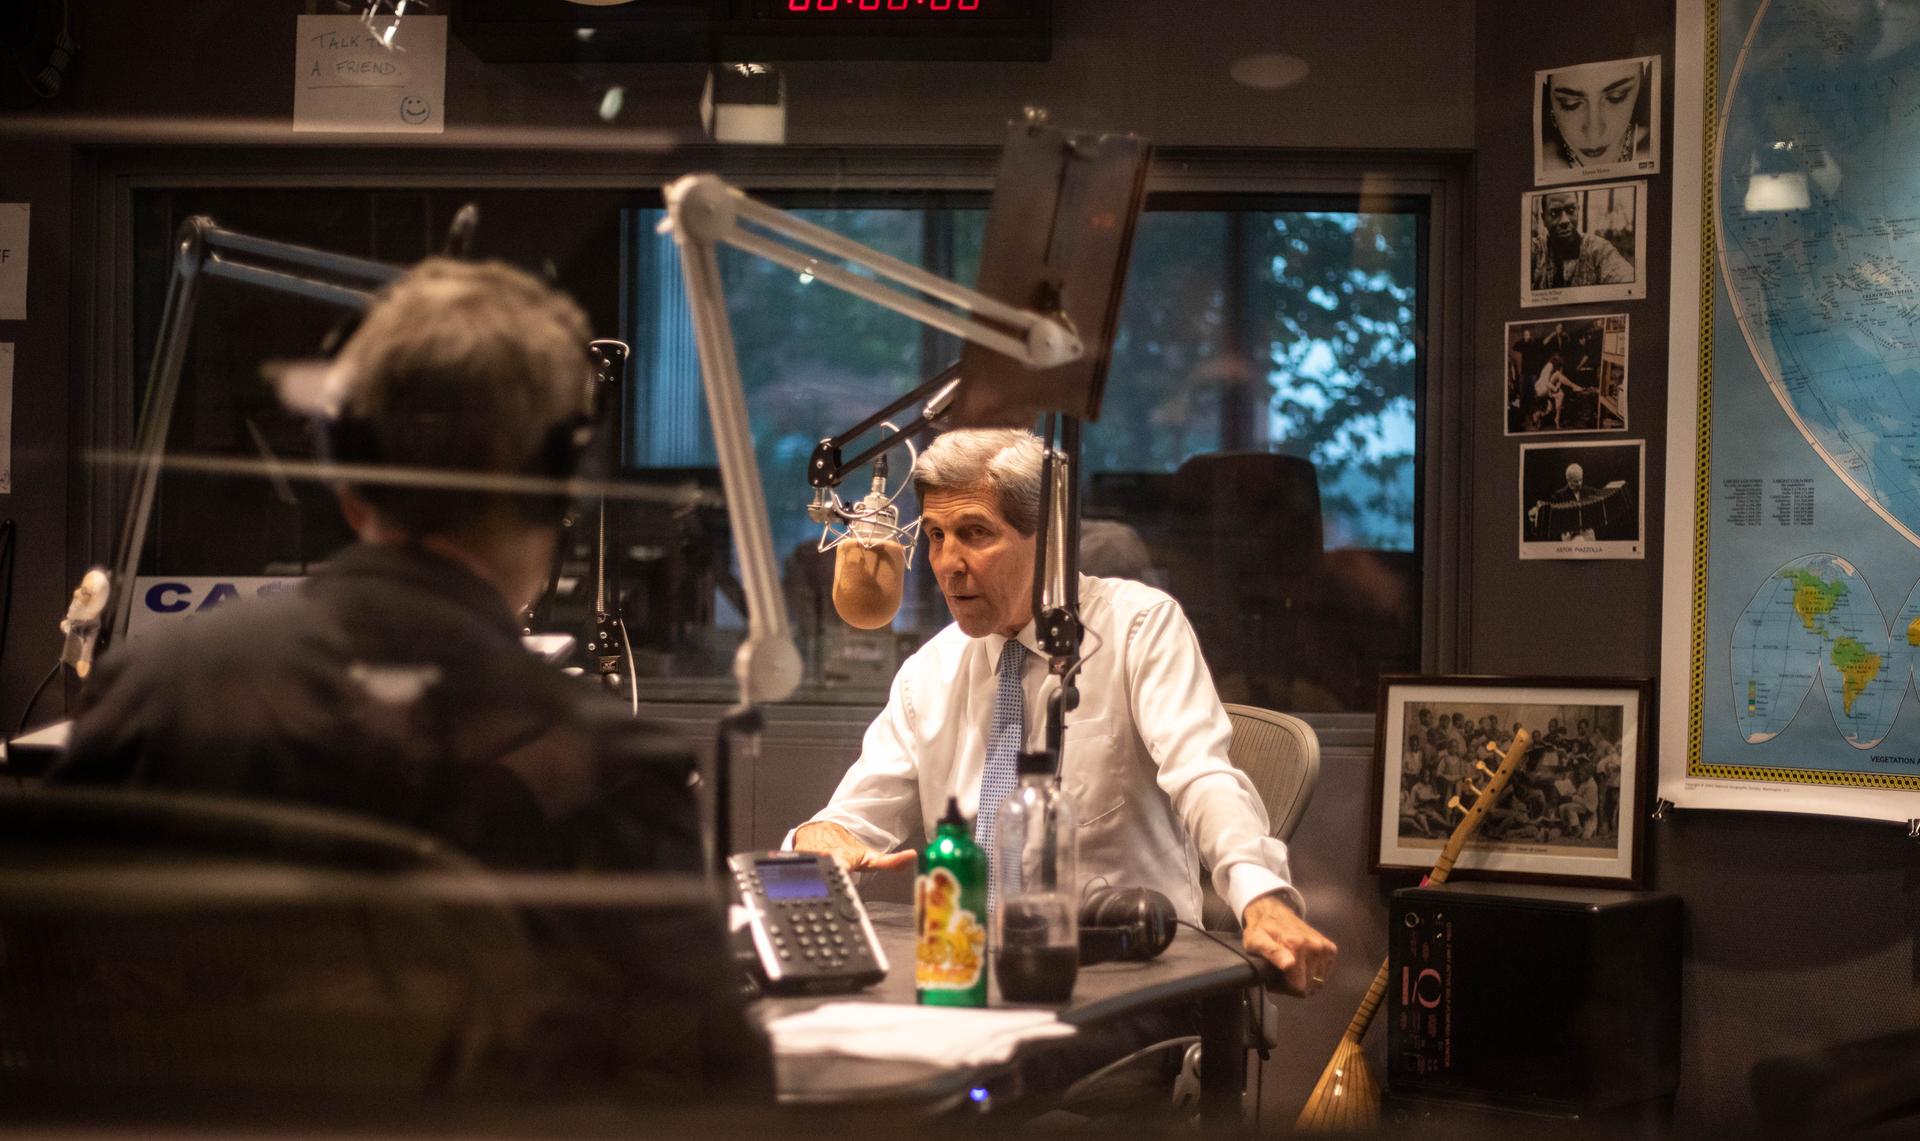 John Kerry stands behind the mic in The World studio